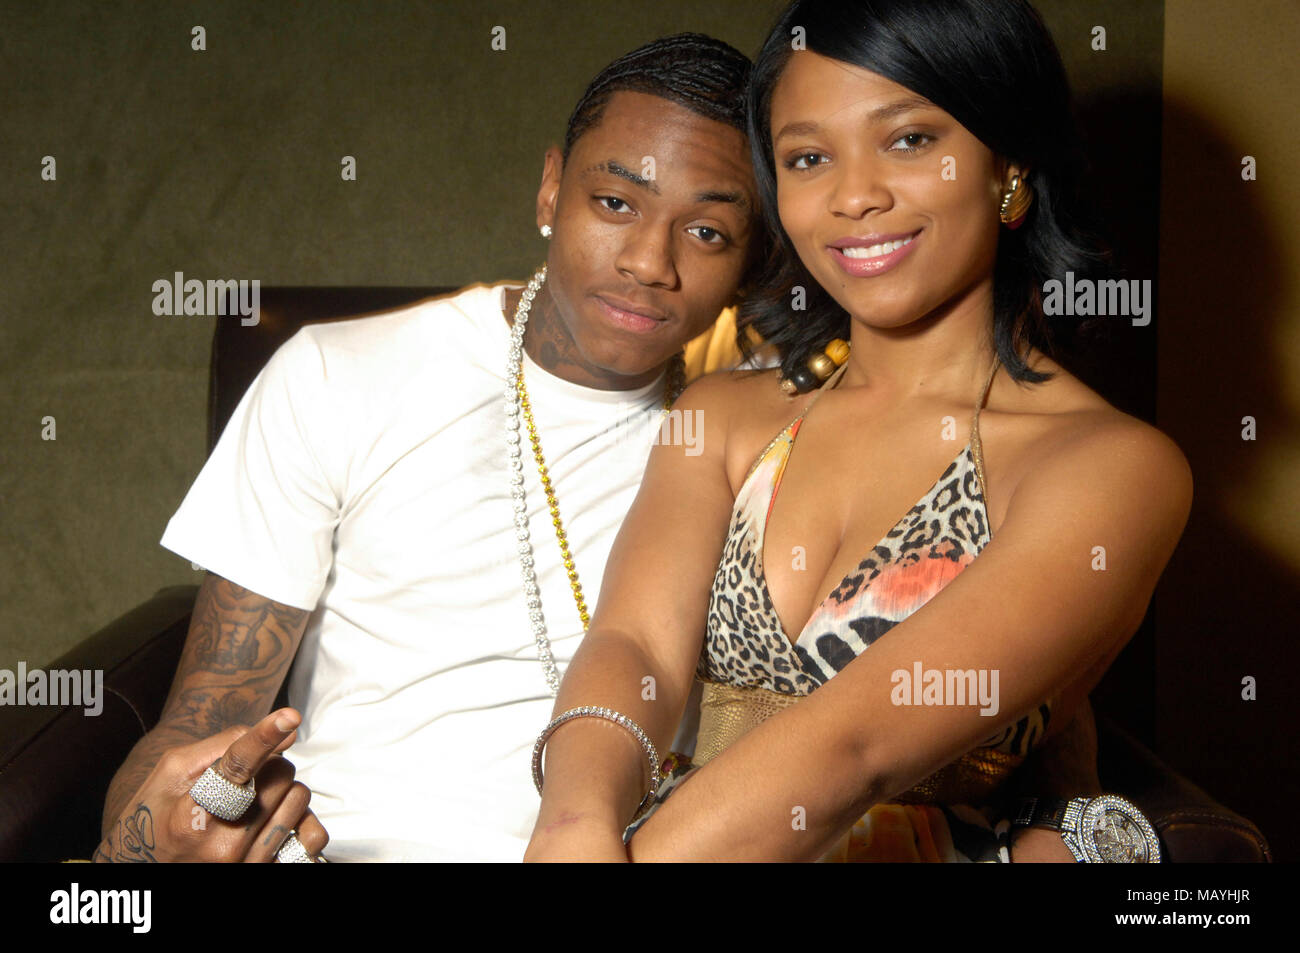 (L-R) EXCLUSIVE Rapper Soulja Boy Tell 'Em and Teairra Mari portrait at the Record Plant in Los Angeles. Stock Photo